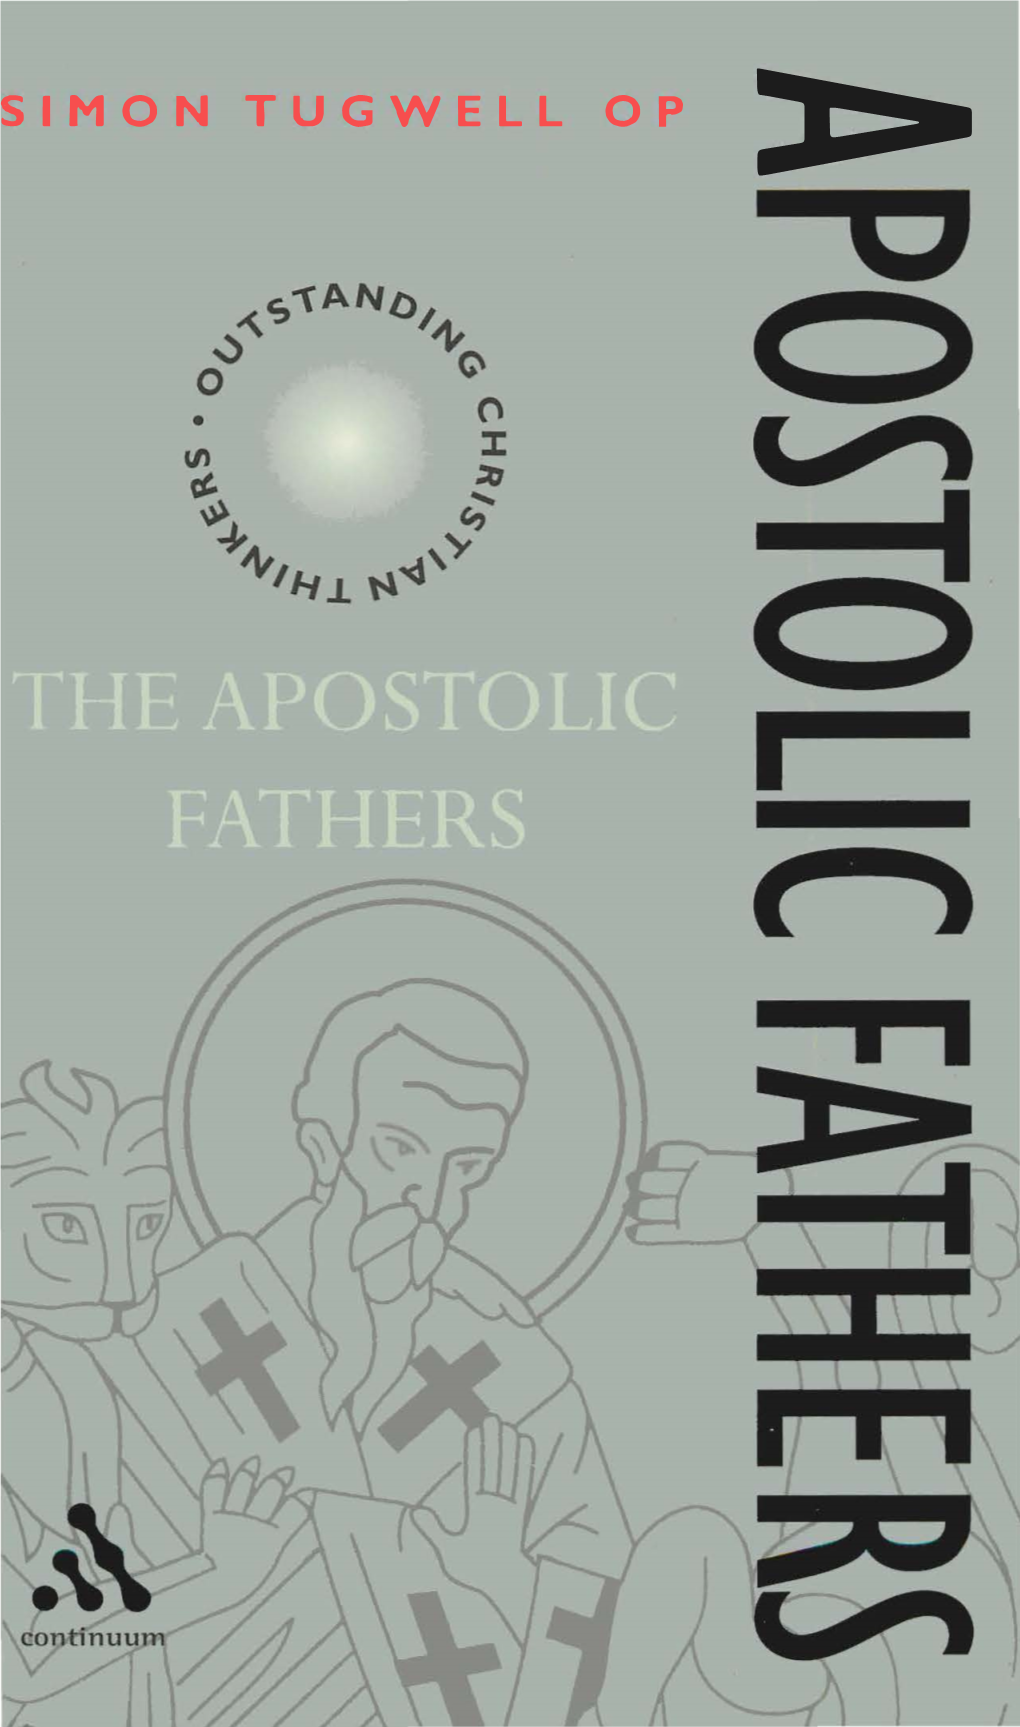 THE APOSTOLIC FATHERS OUTSTANDING Cf/RJSTIAN Tfi/NKERS